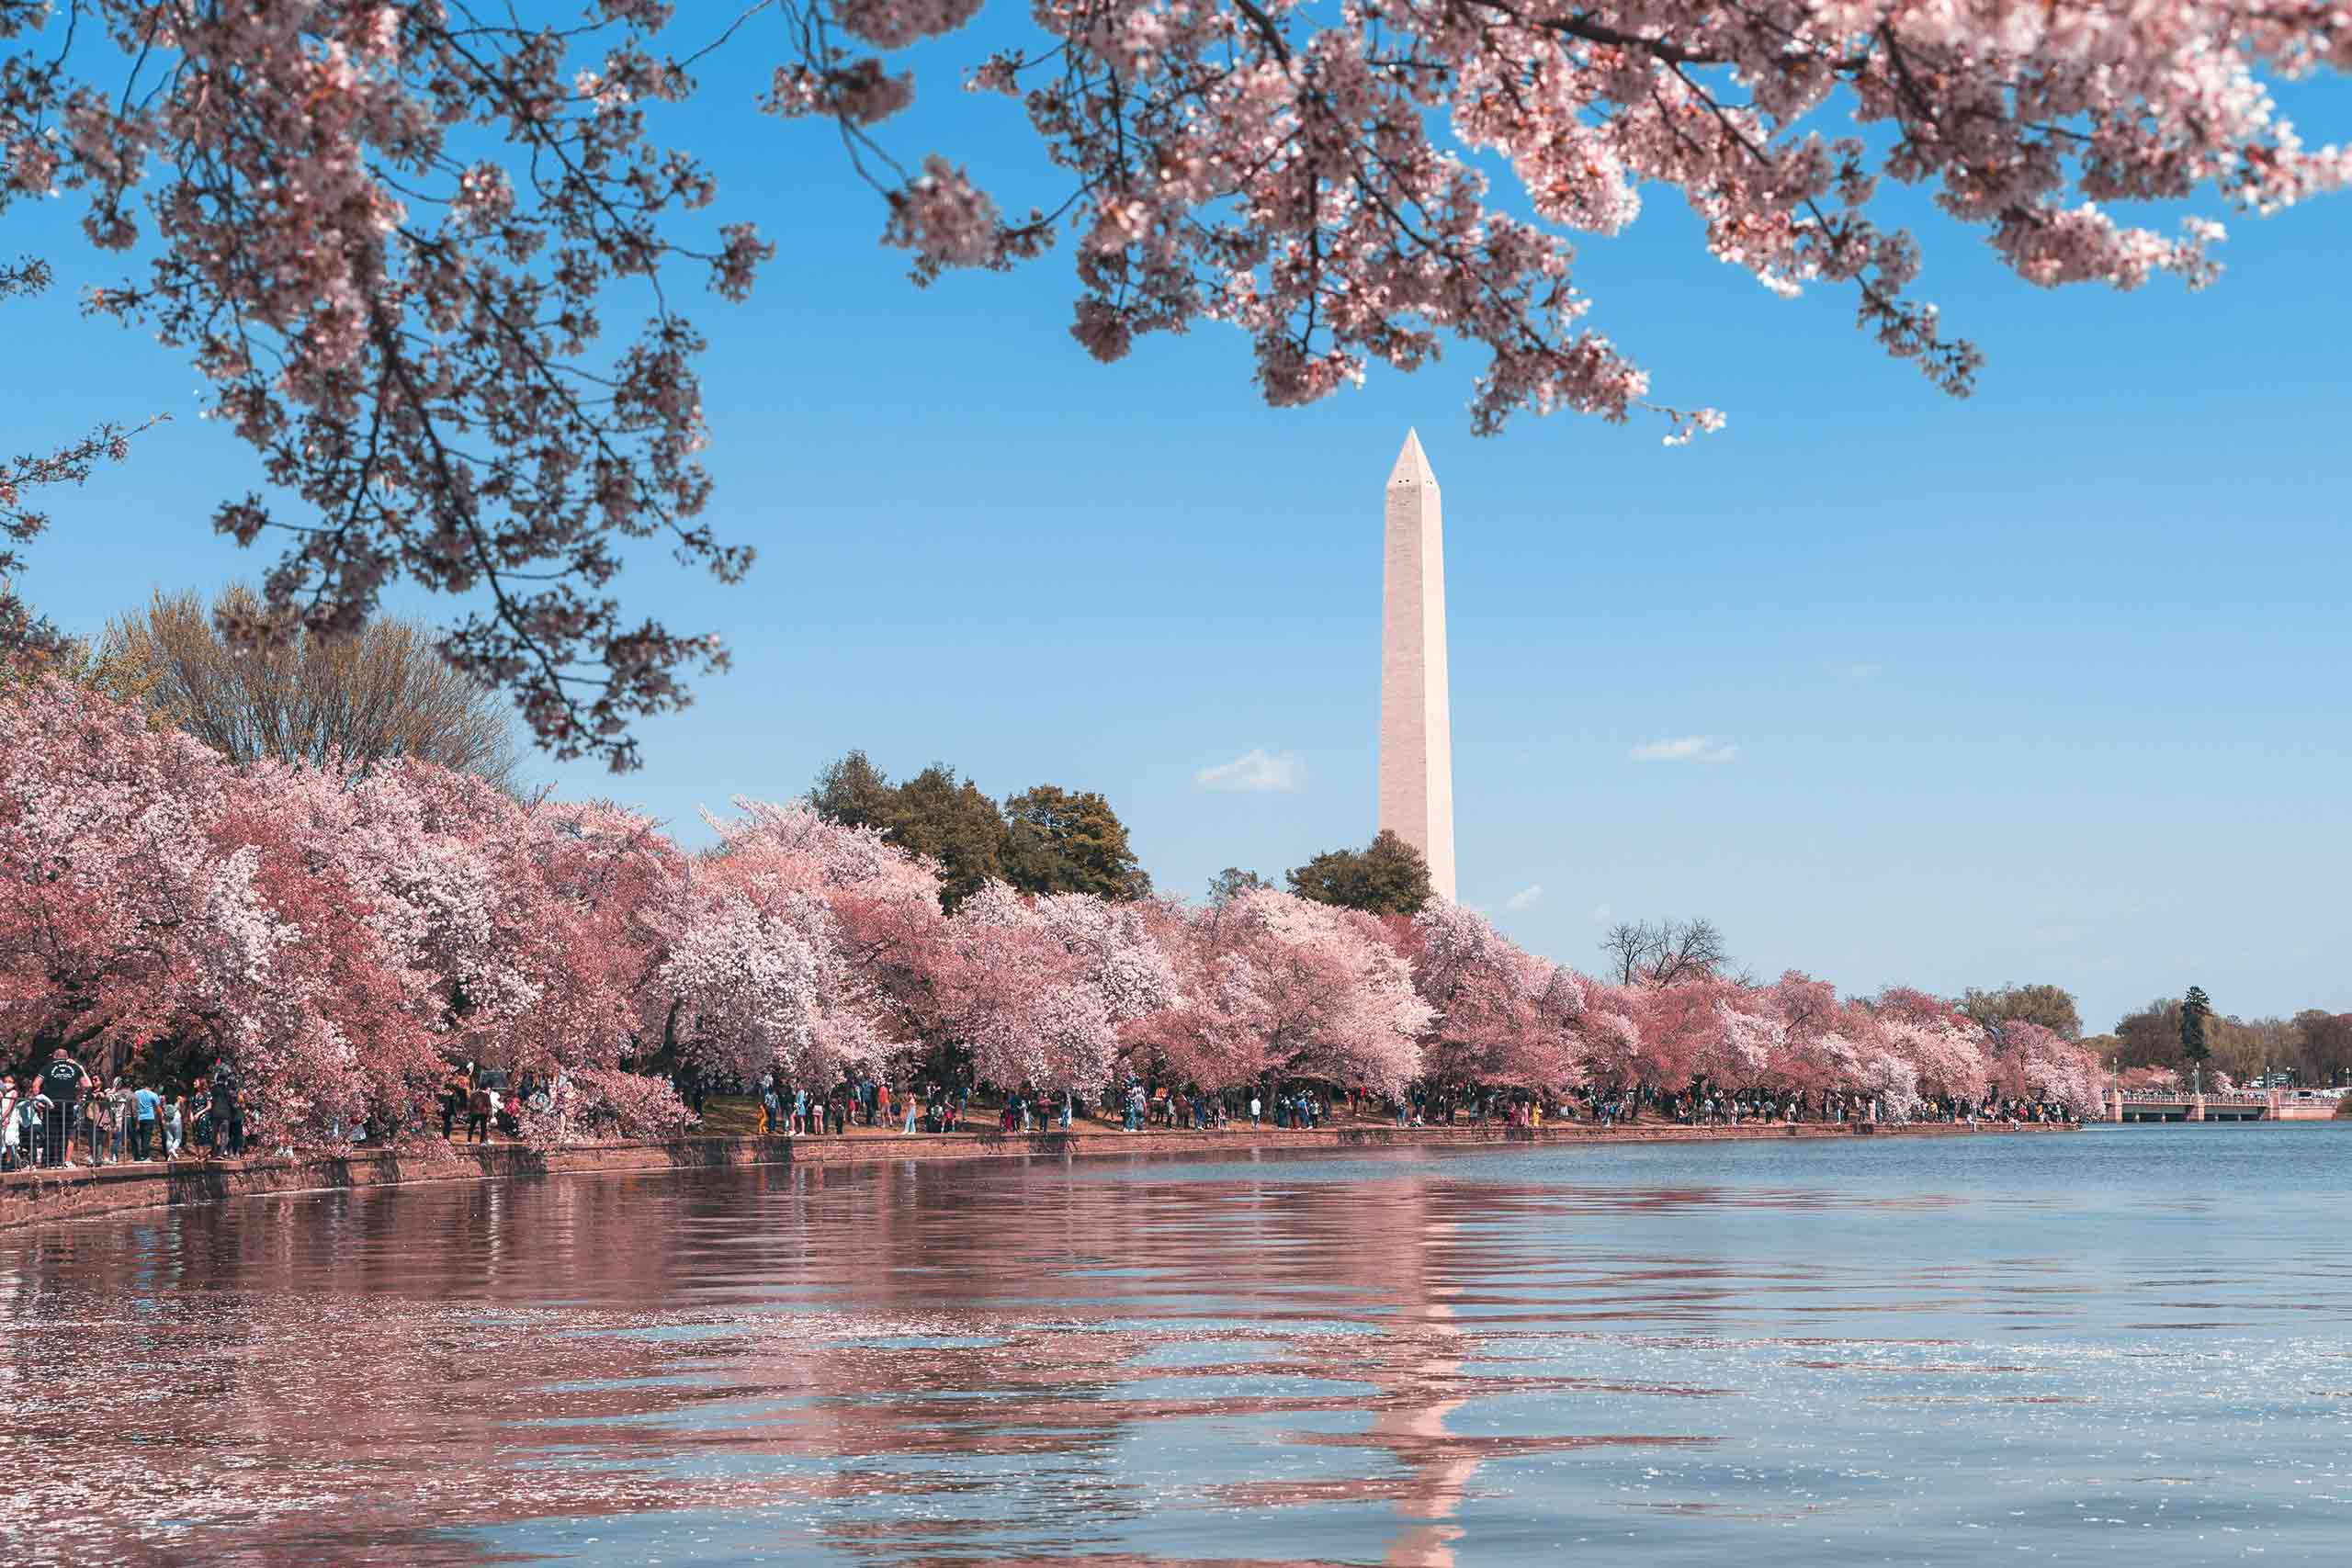 Cherry blossoms and the Washington monument in Washington DC